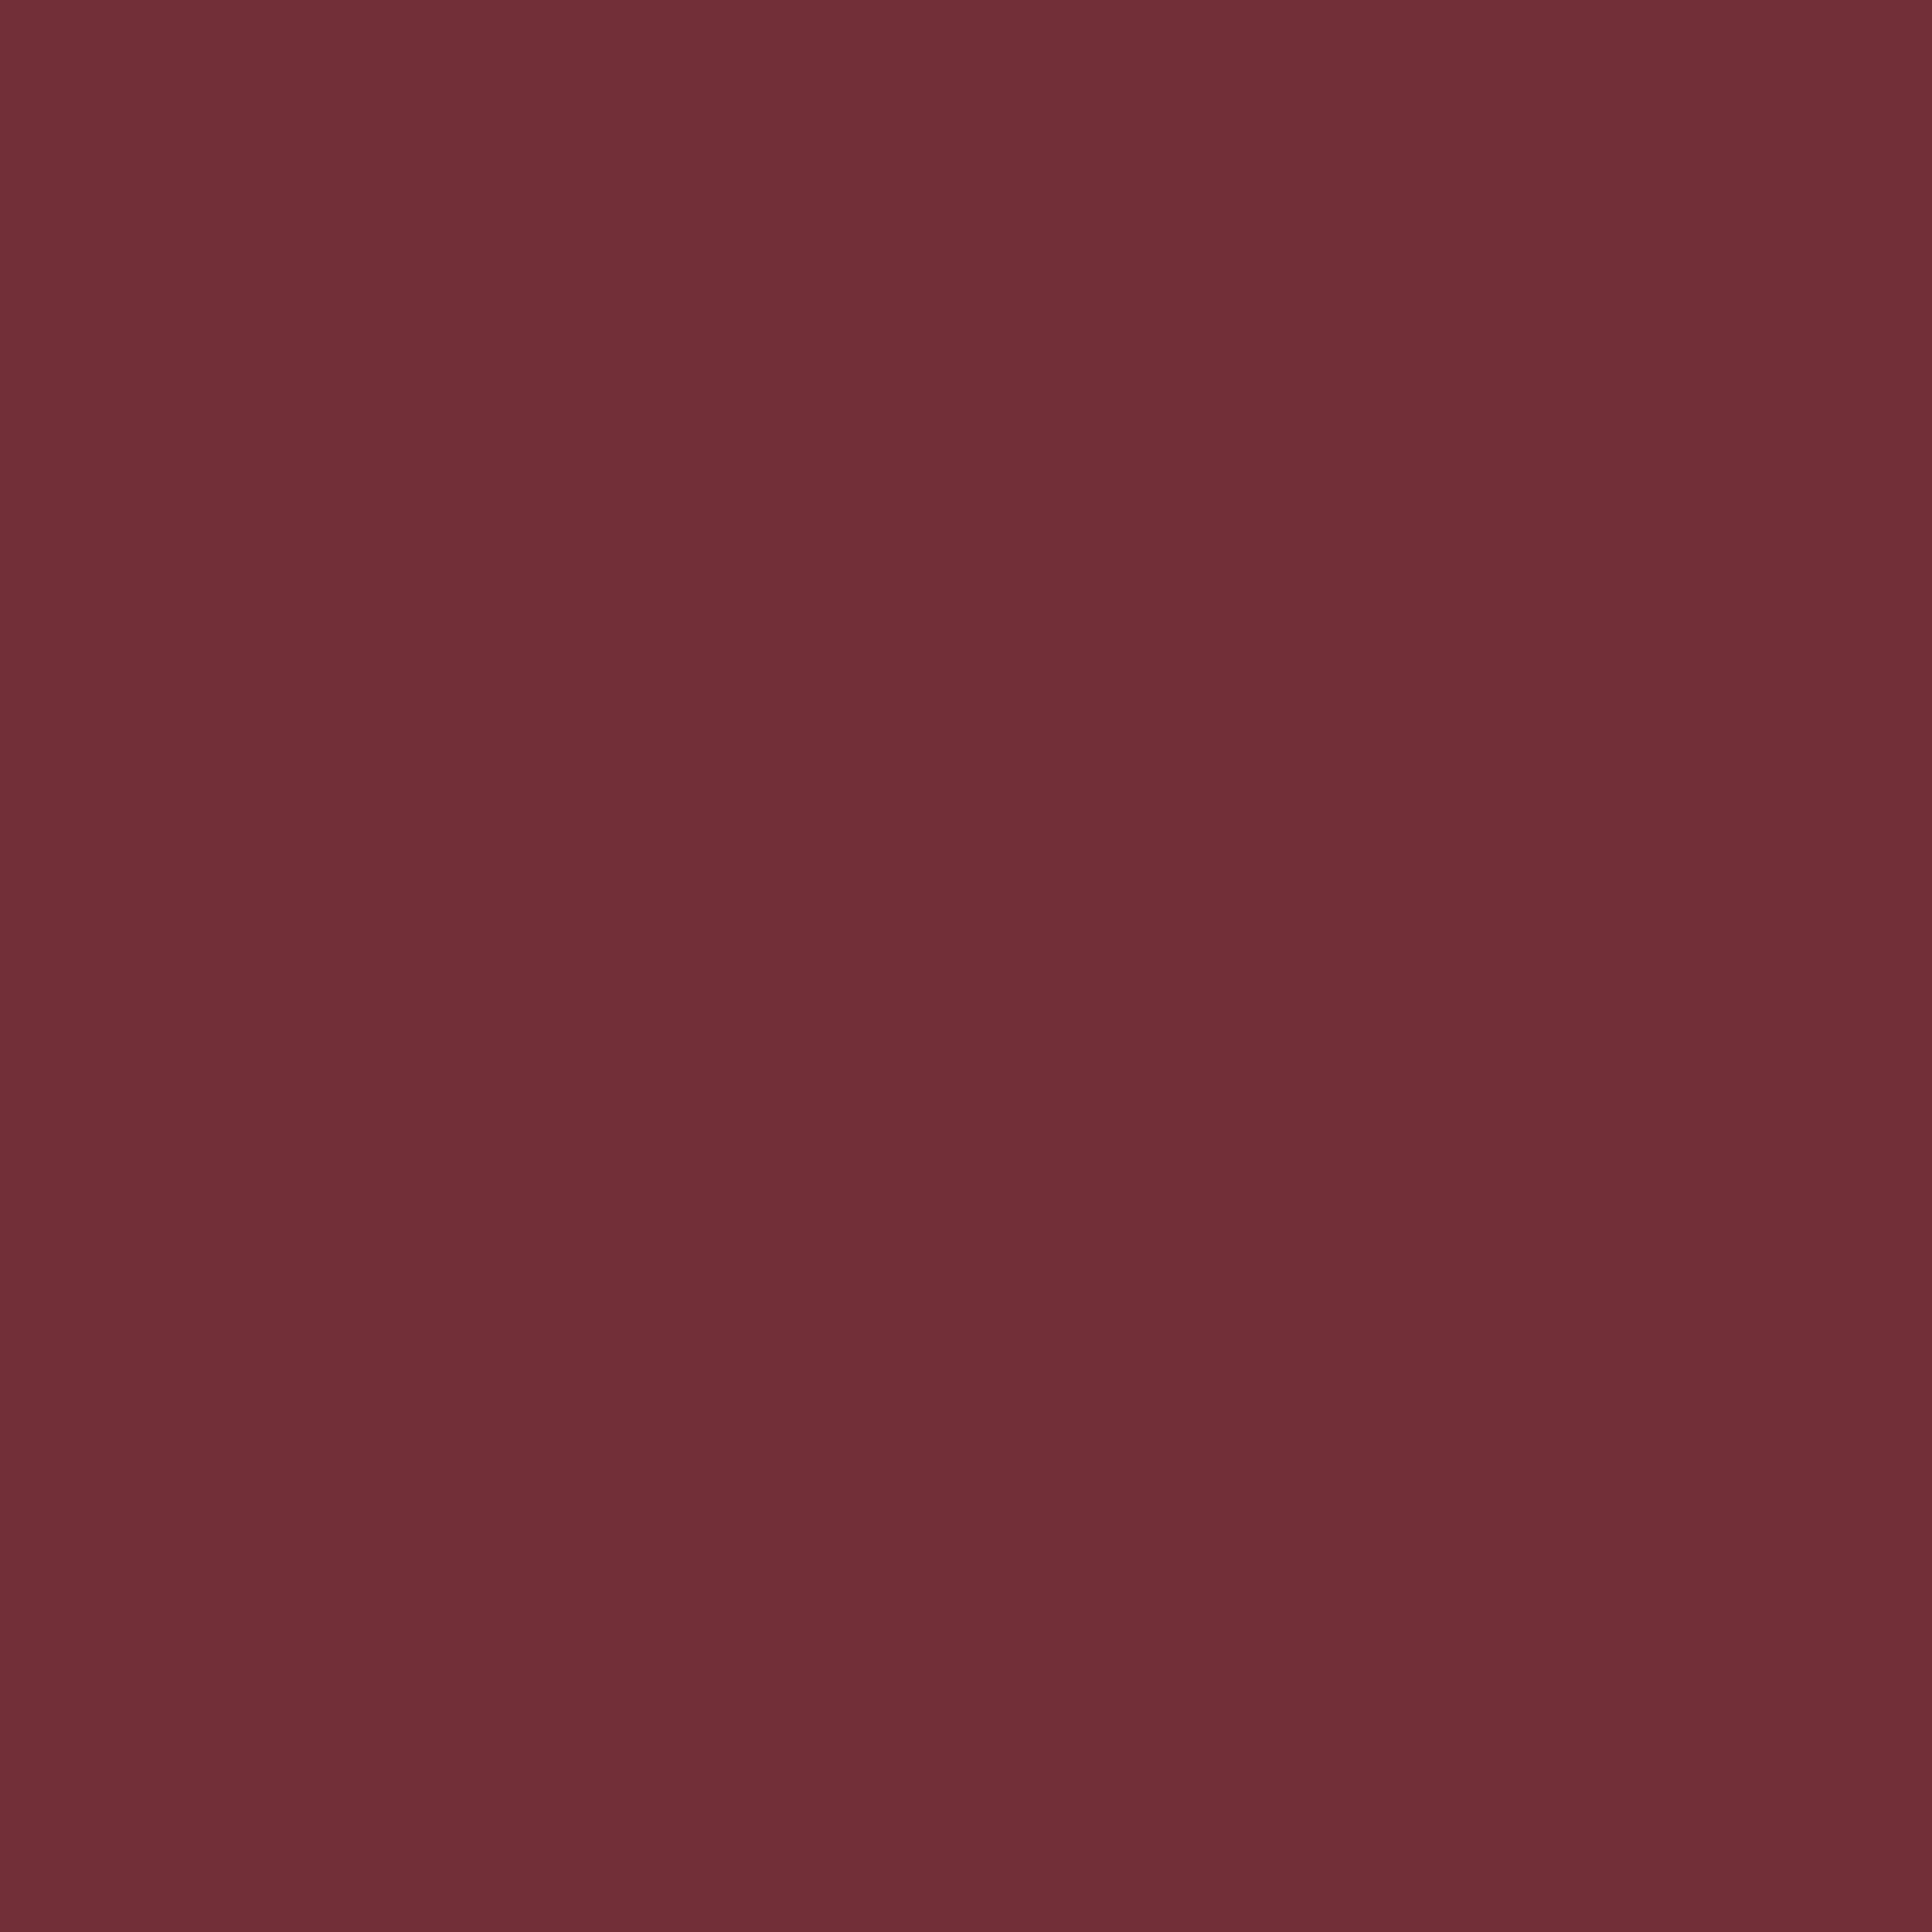 3600x3600 Wine Solid Color Background